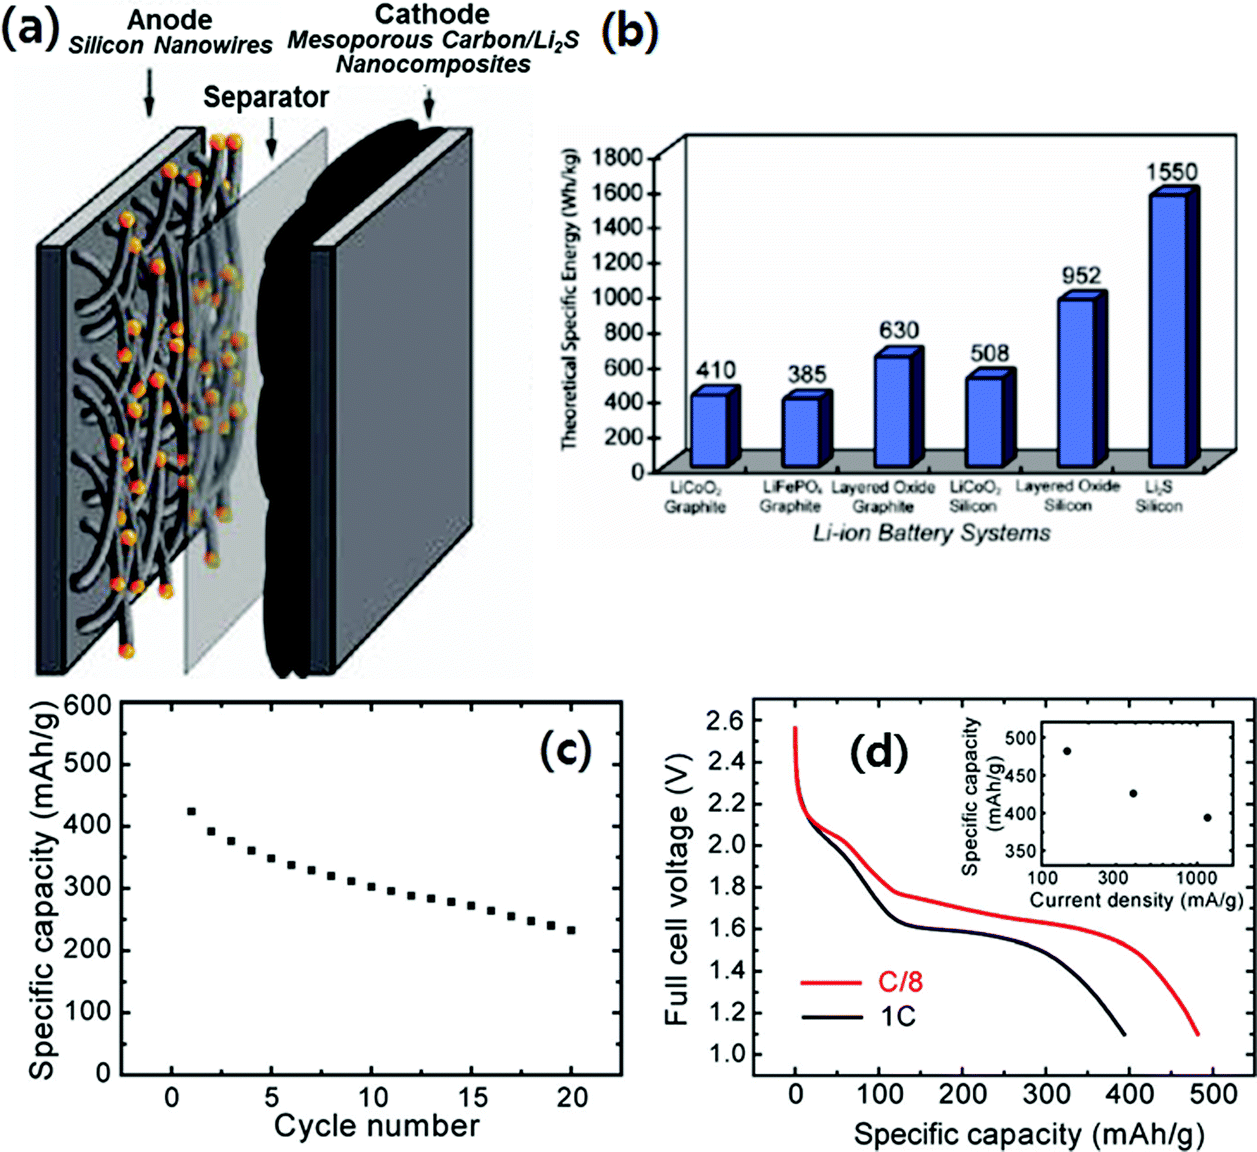 Rational design of silicon-based composites for high-energy storage devices  - Journal of Materials Chemistry A (RSC Publishing) DOI:10.1039/C6TA00265J